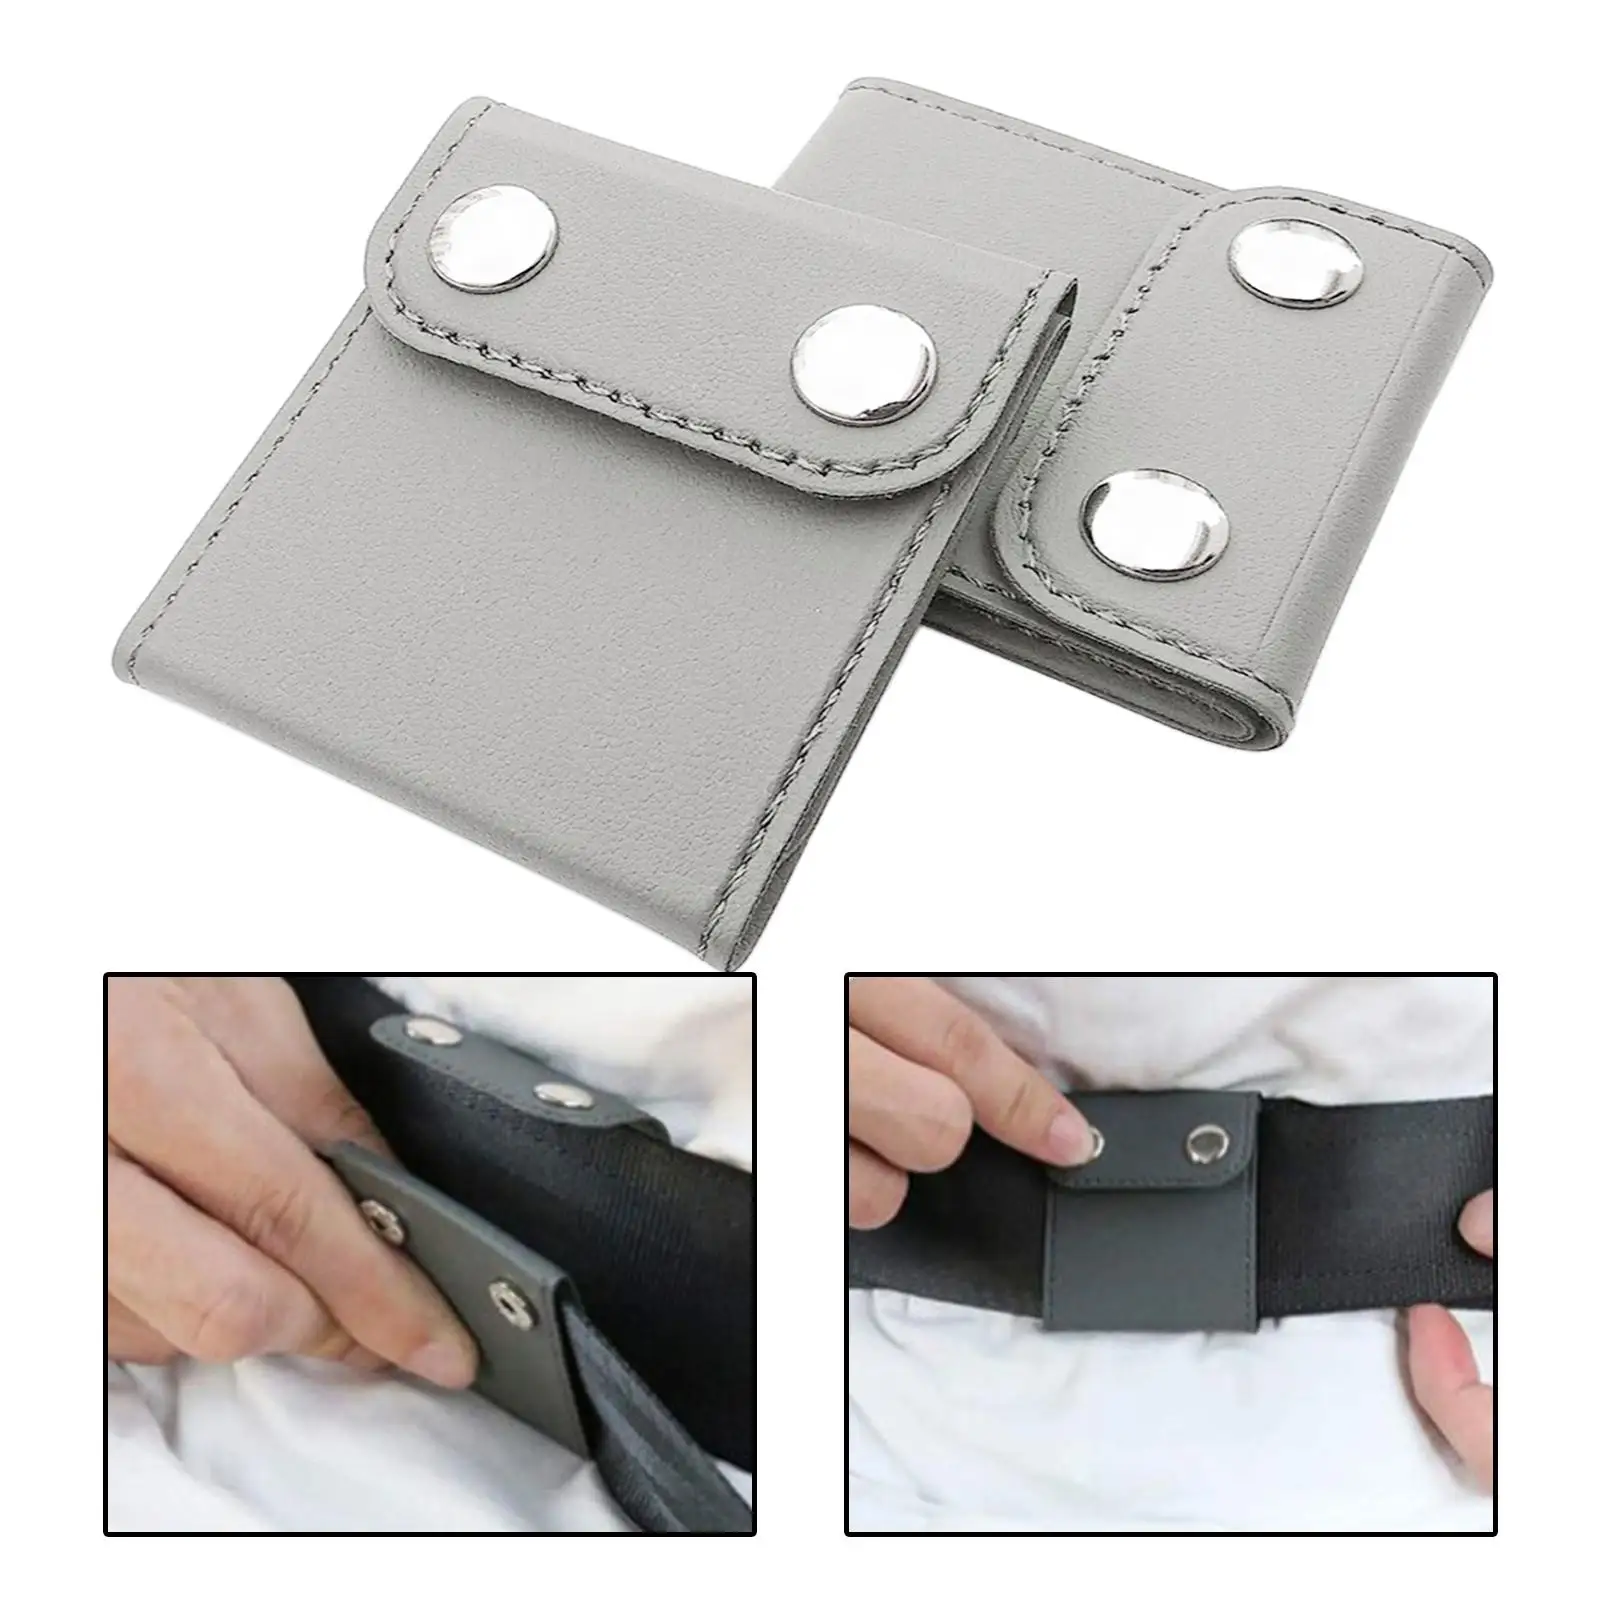 2 Pieces Auto Seatbelt Adjuster Shoulder Protector Snap Button Type Safety Covers Interior Positioner Locking Clip Kids Adults